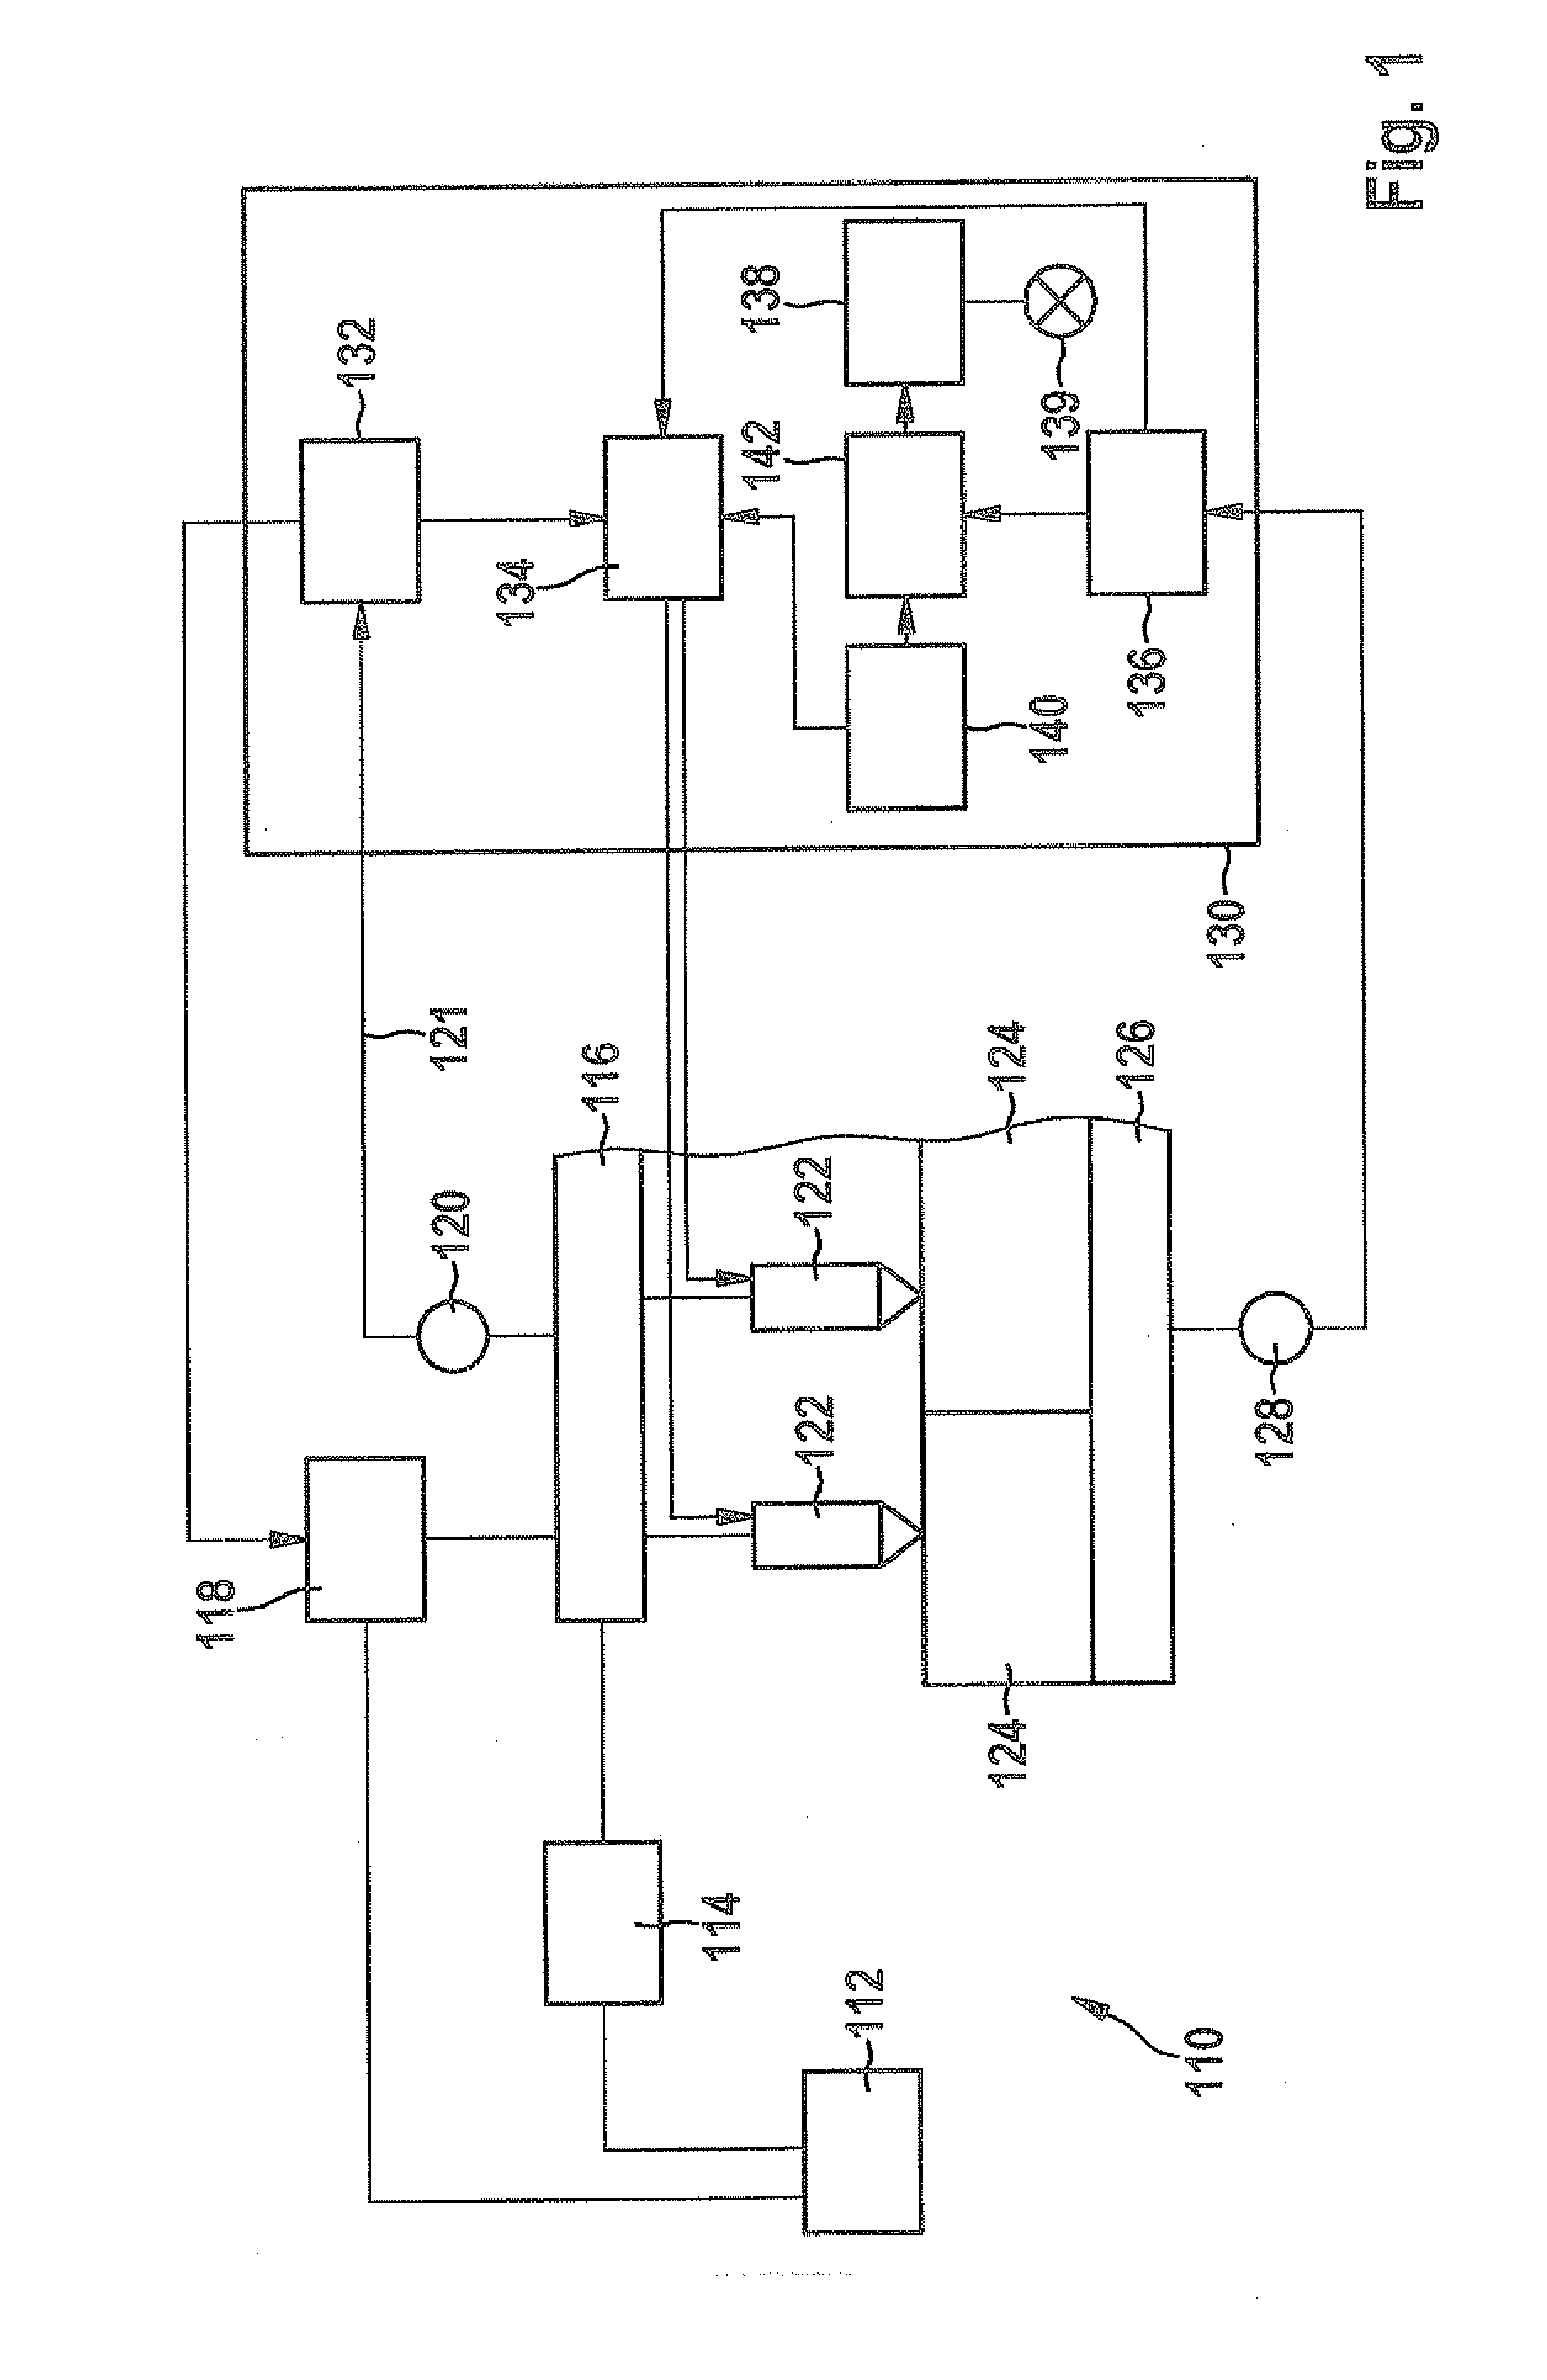 Method and Device for Monitoring a High-Pressure Fuel System